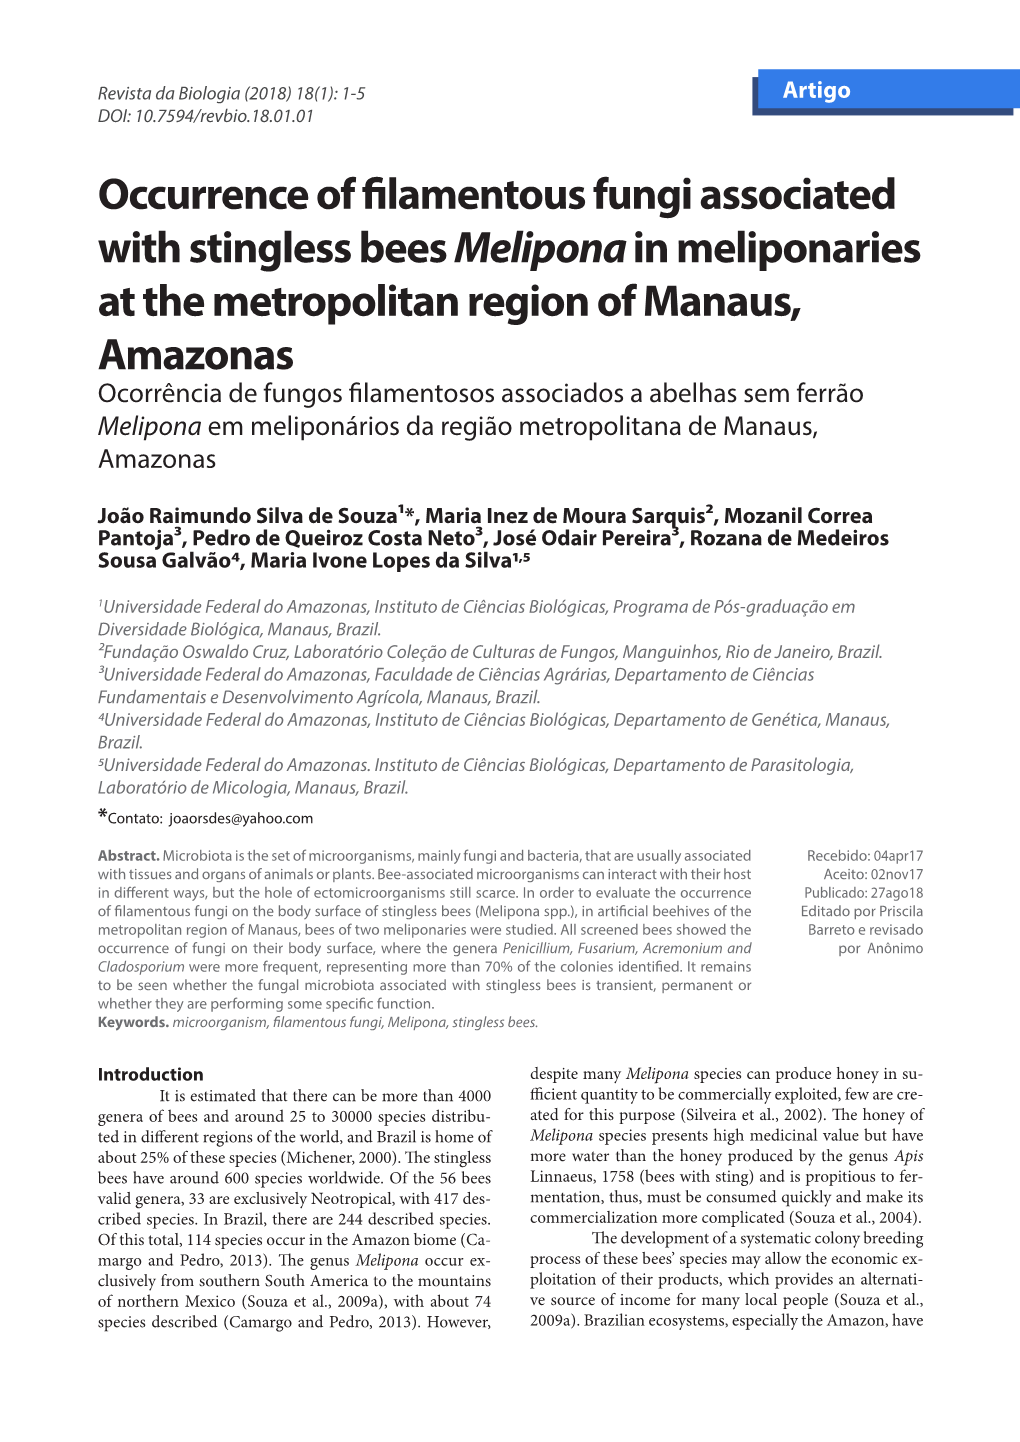 Occurrence of Filamentous Fungi Associated with Stingless Bees